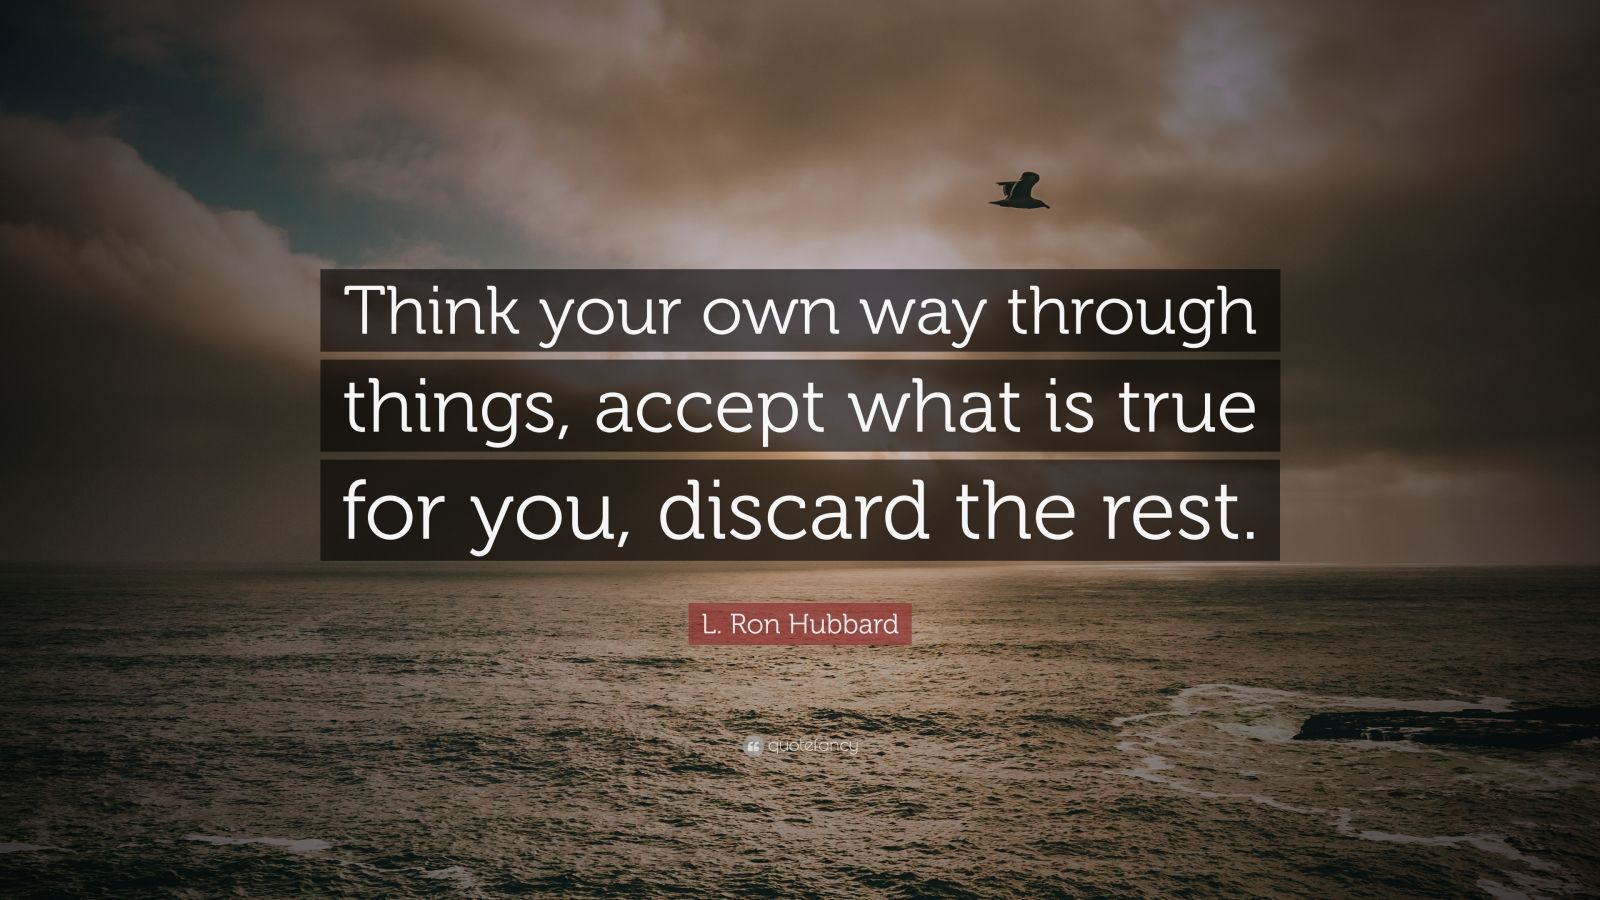 L. Ron Hubbard Quote: “Think your own way through things, accept what